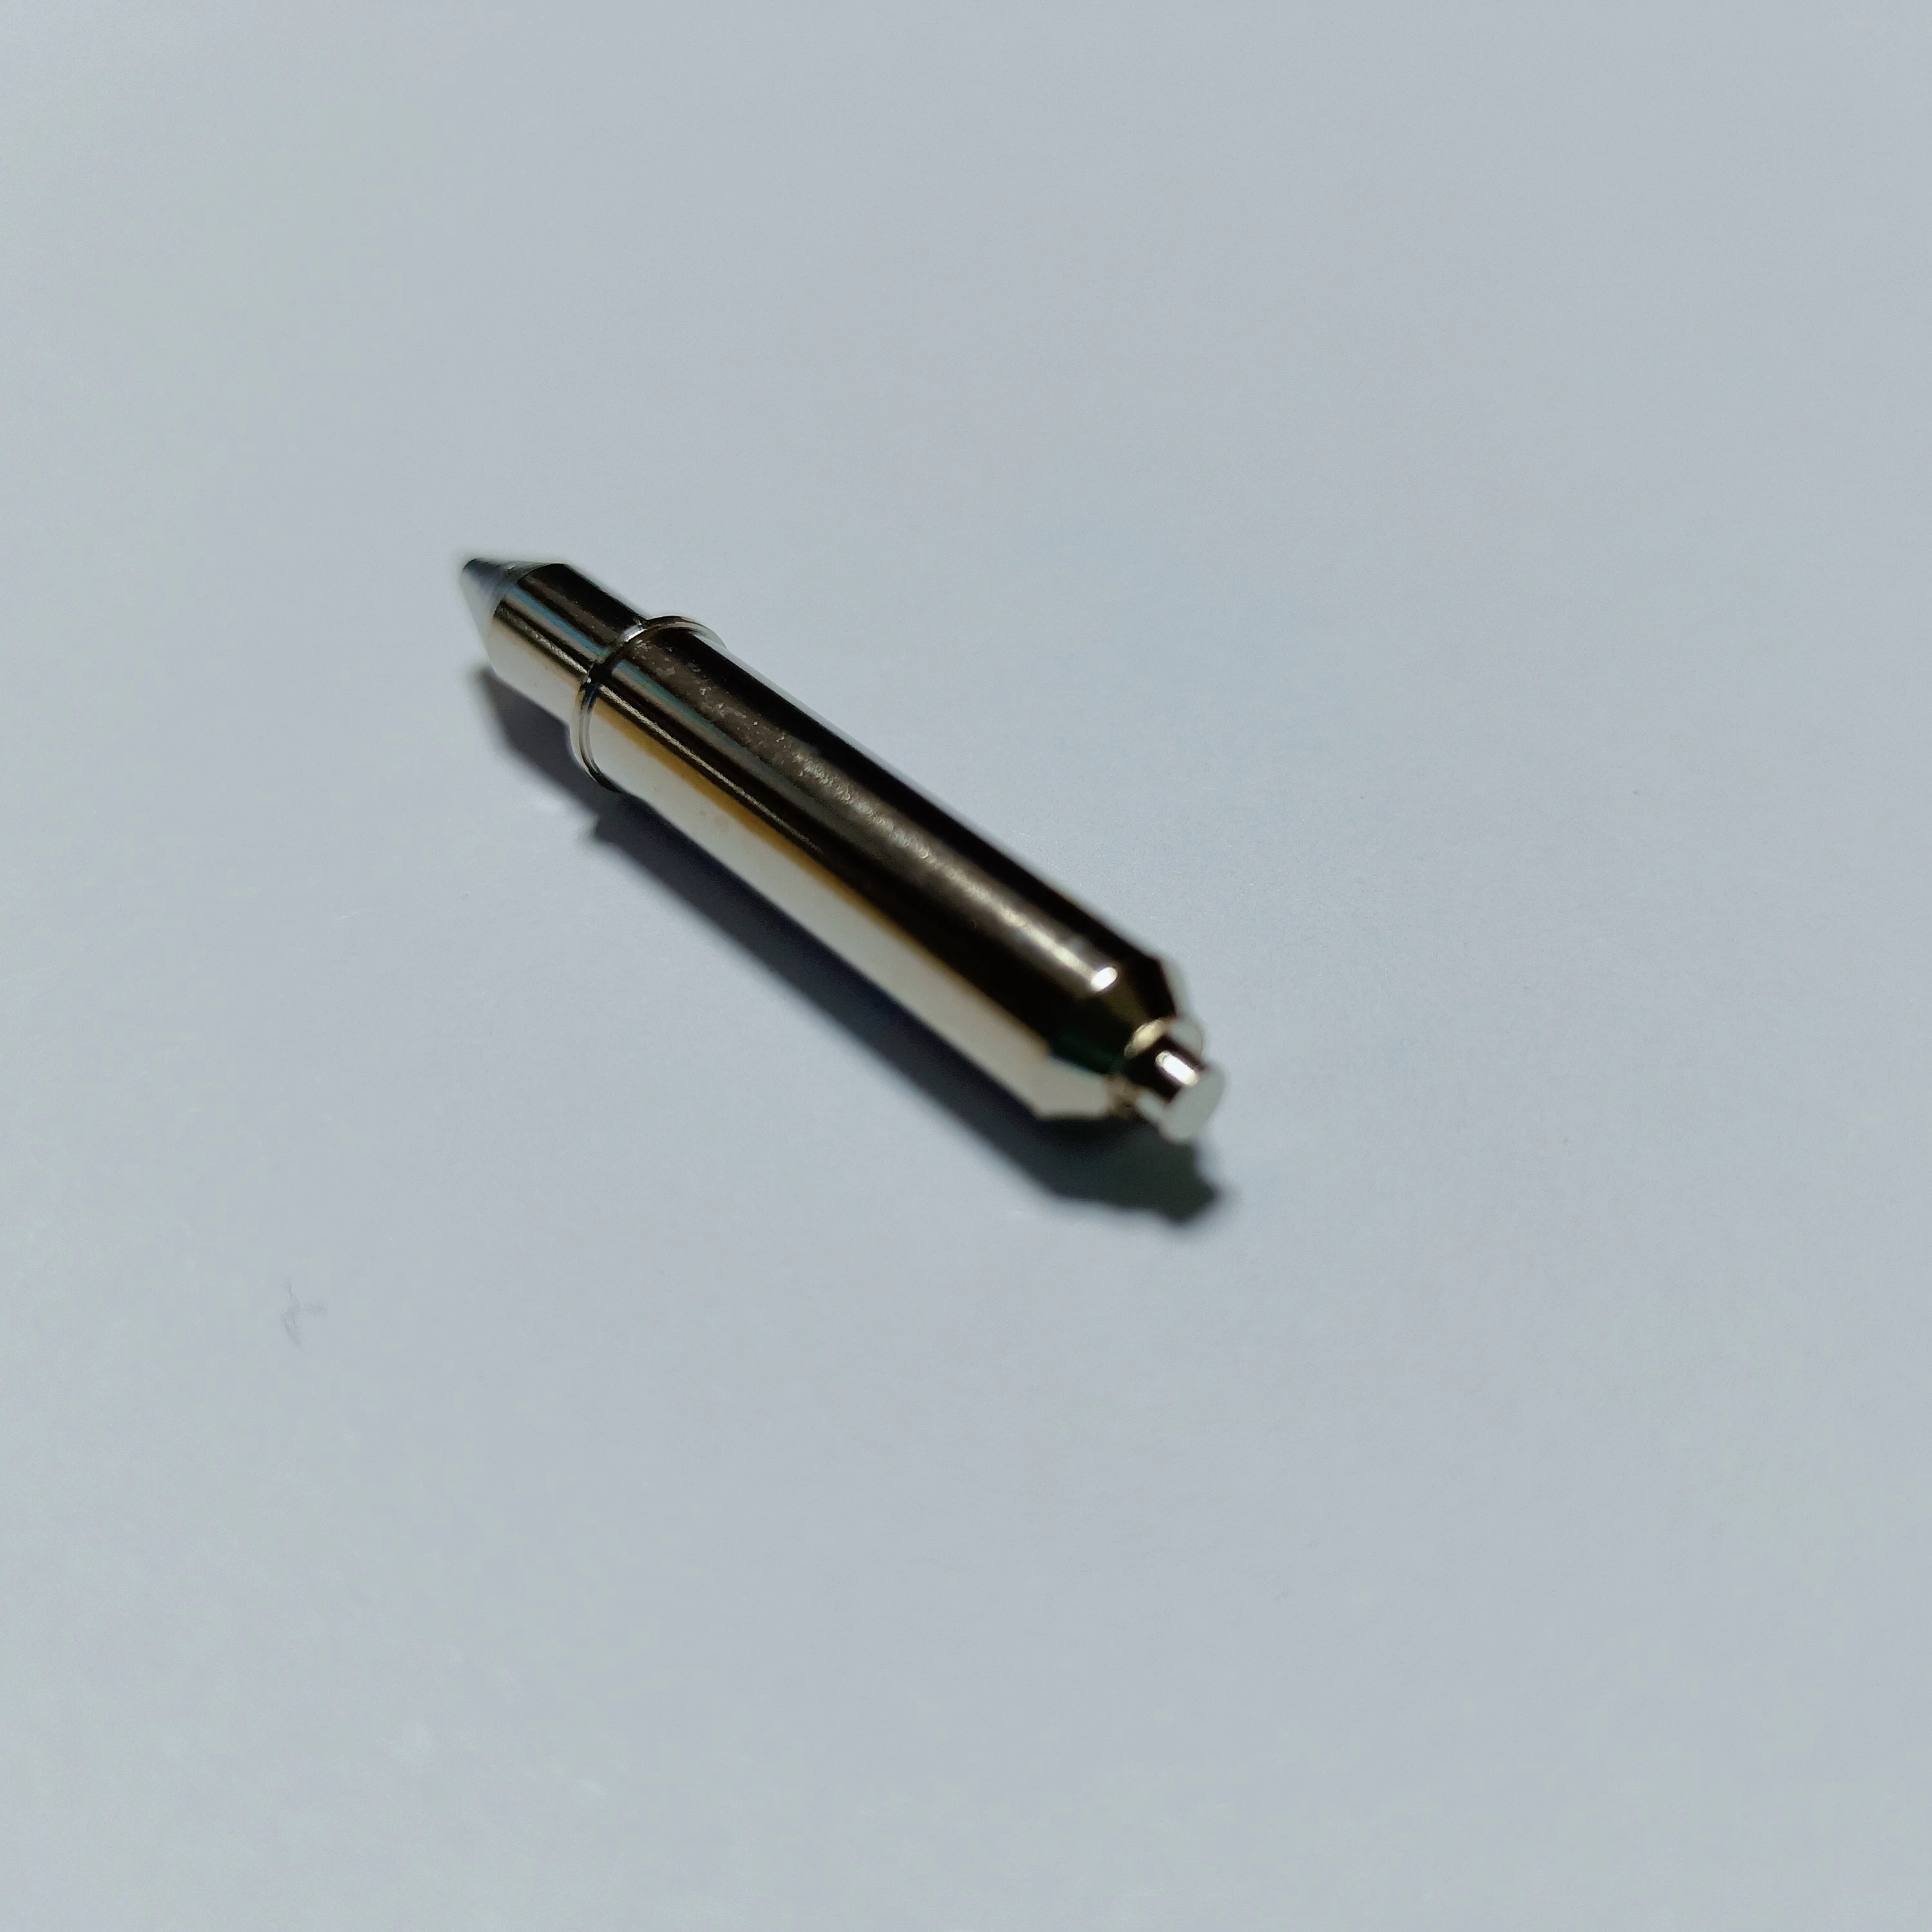 Rushed Fe Guide Probe Pin With Sharp Tip